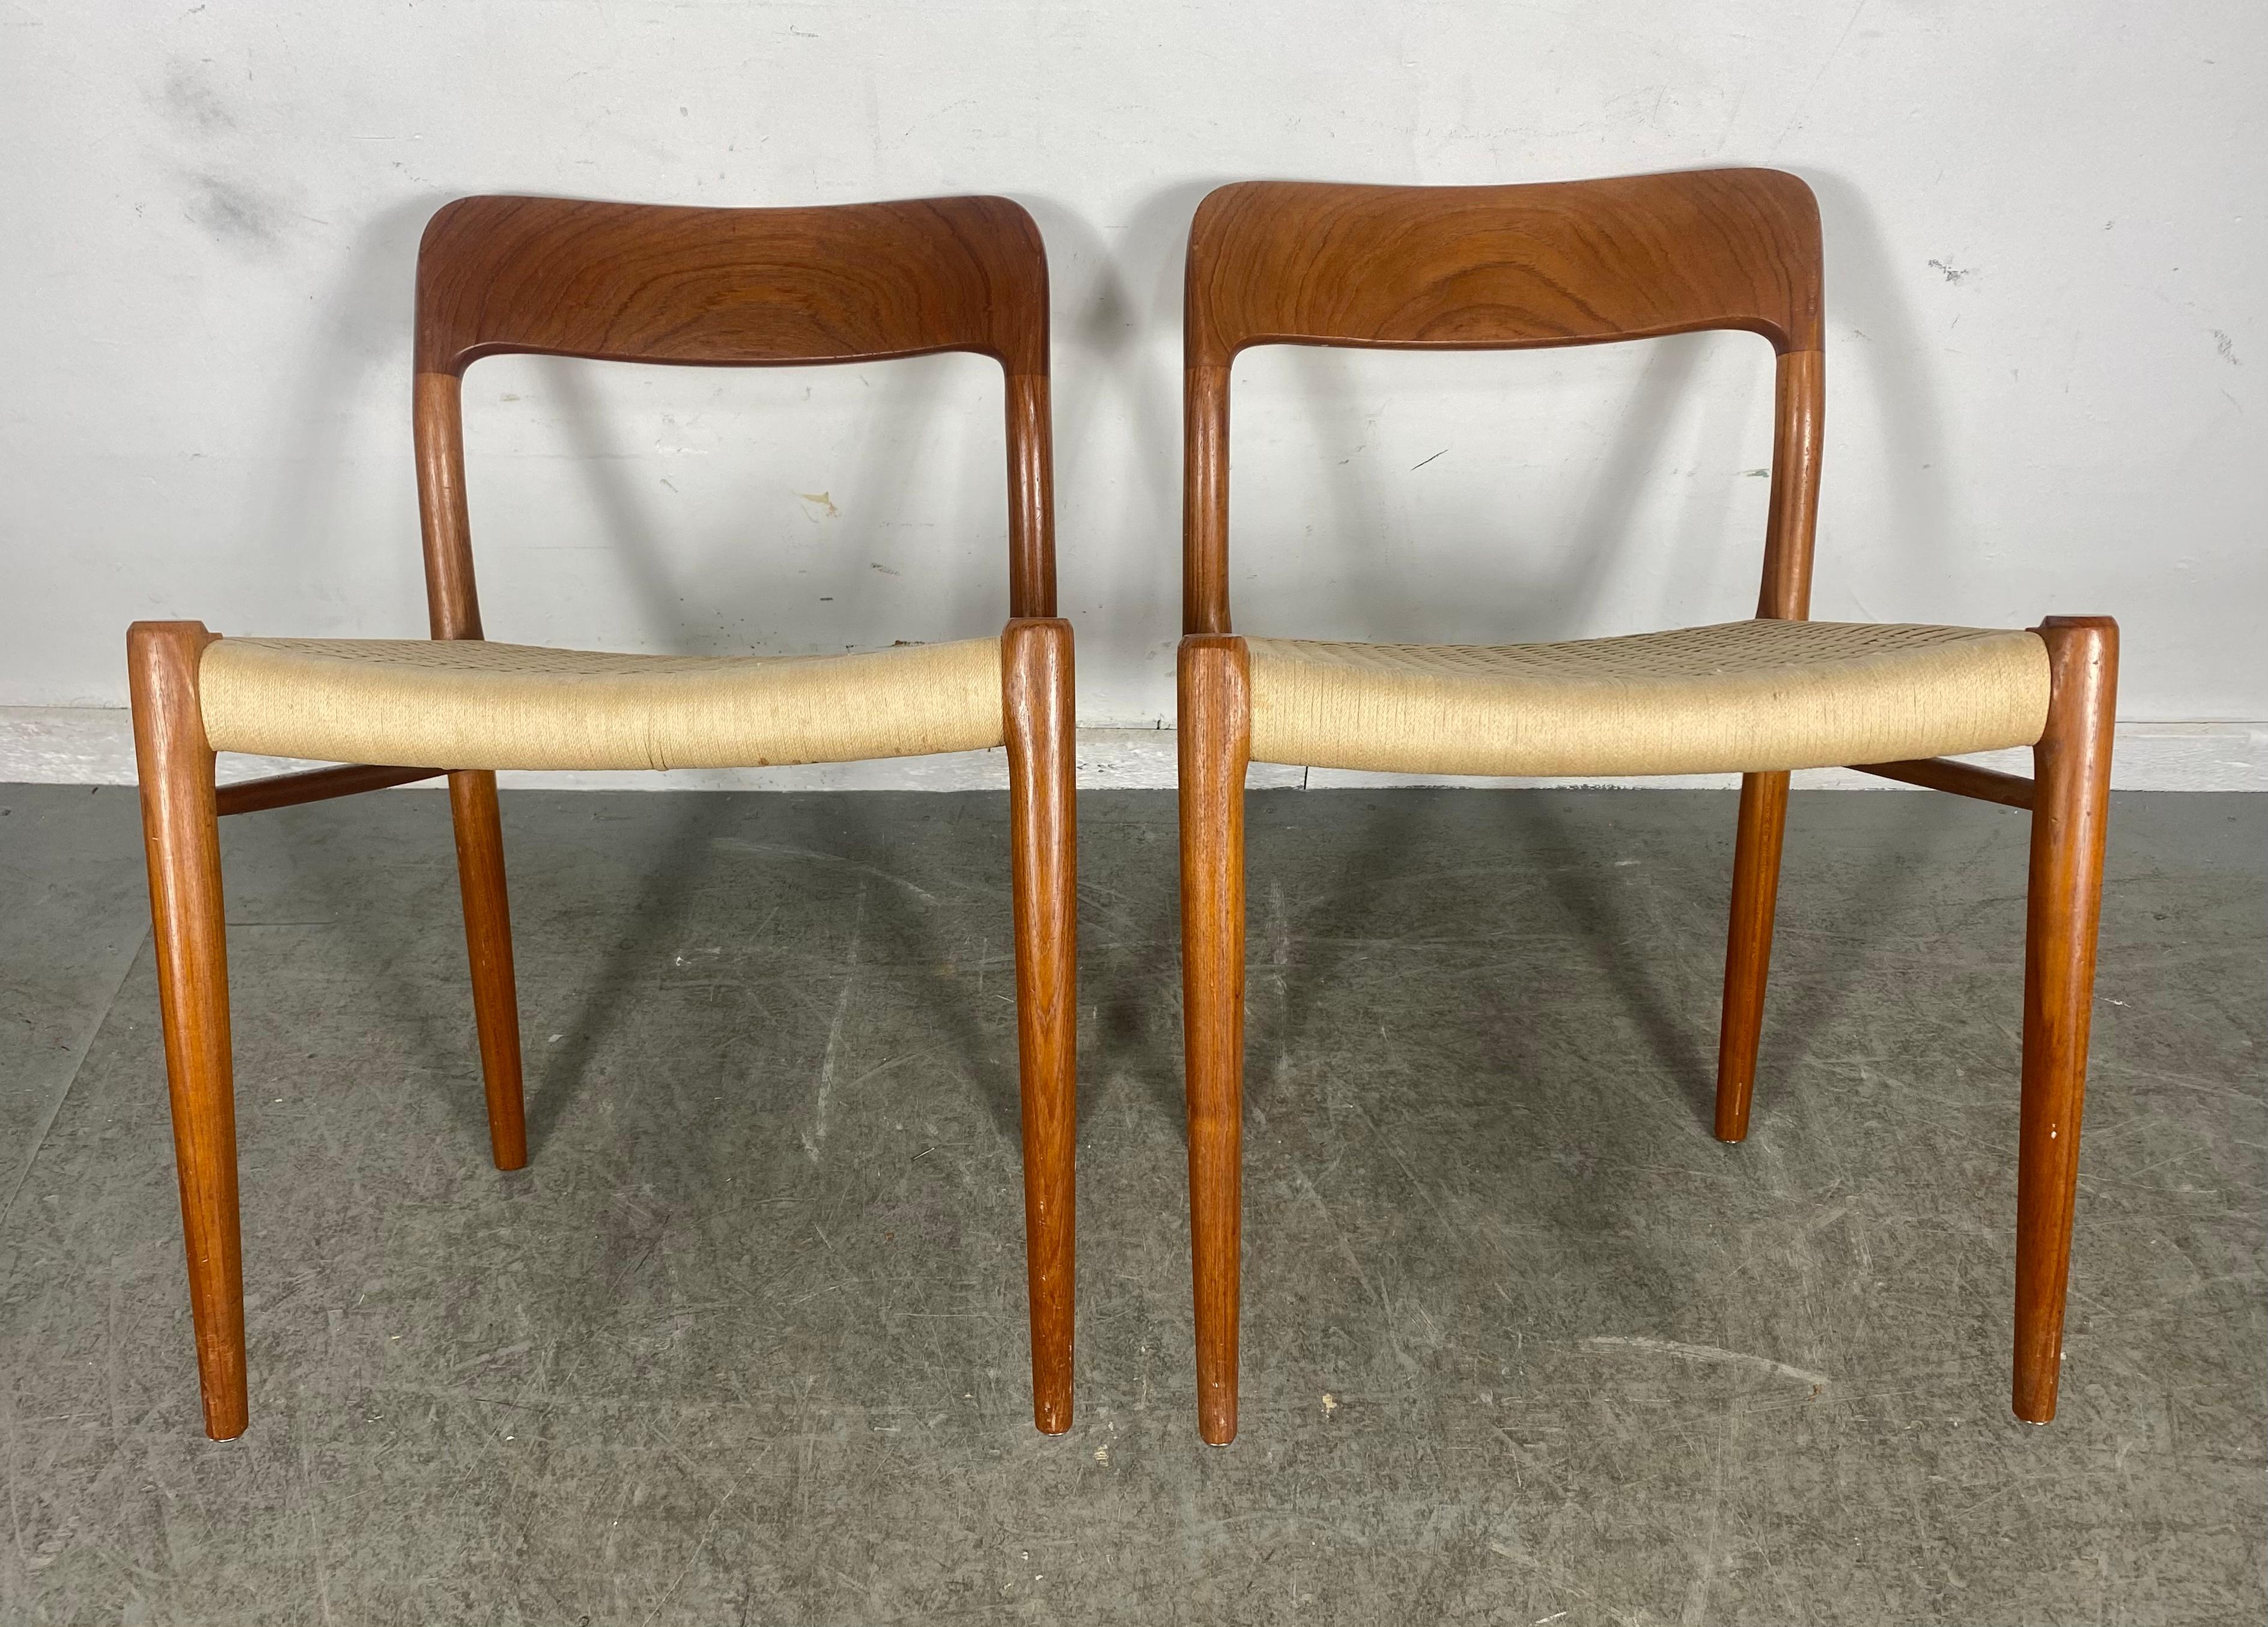 Scandinavian Modern Matched Pair Chairs Teak and Rope by N. O. Møller, Model 71, Denmark, 1960s